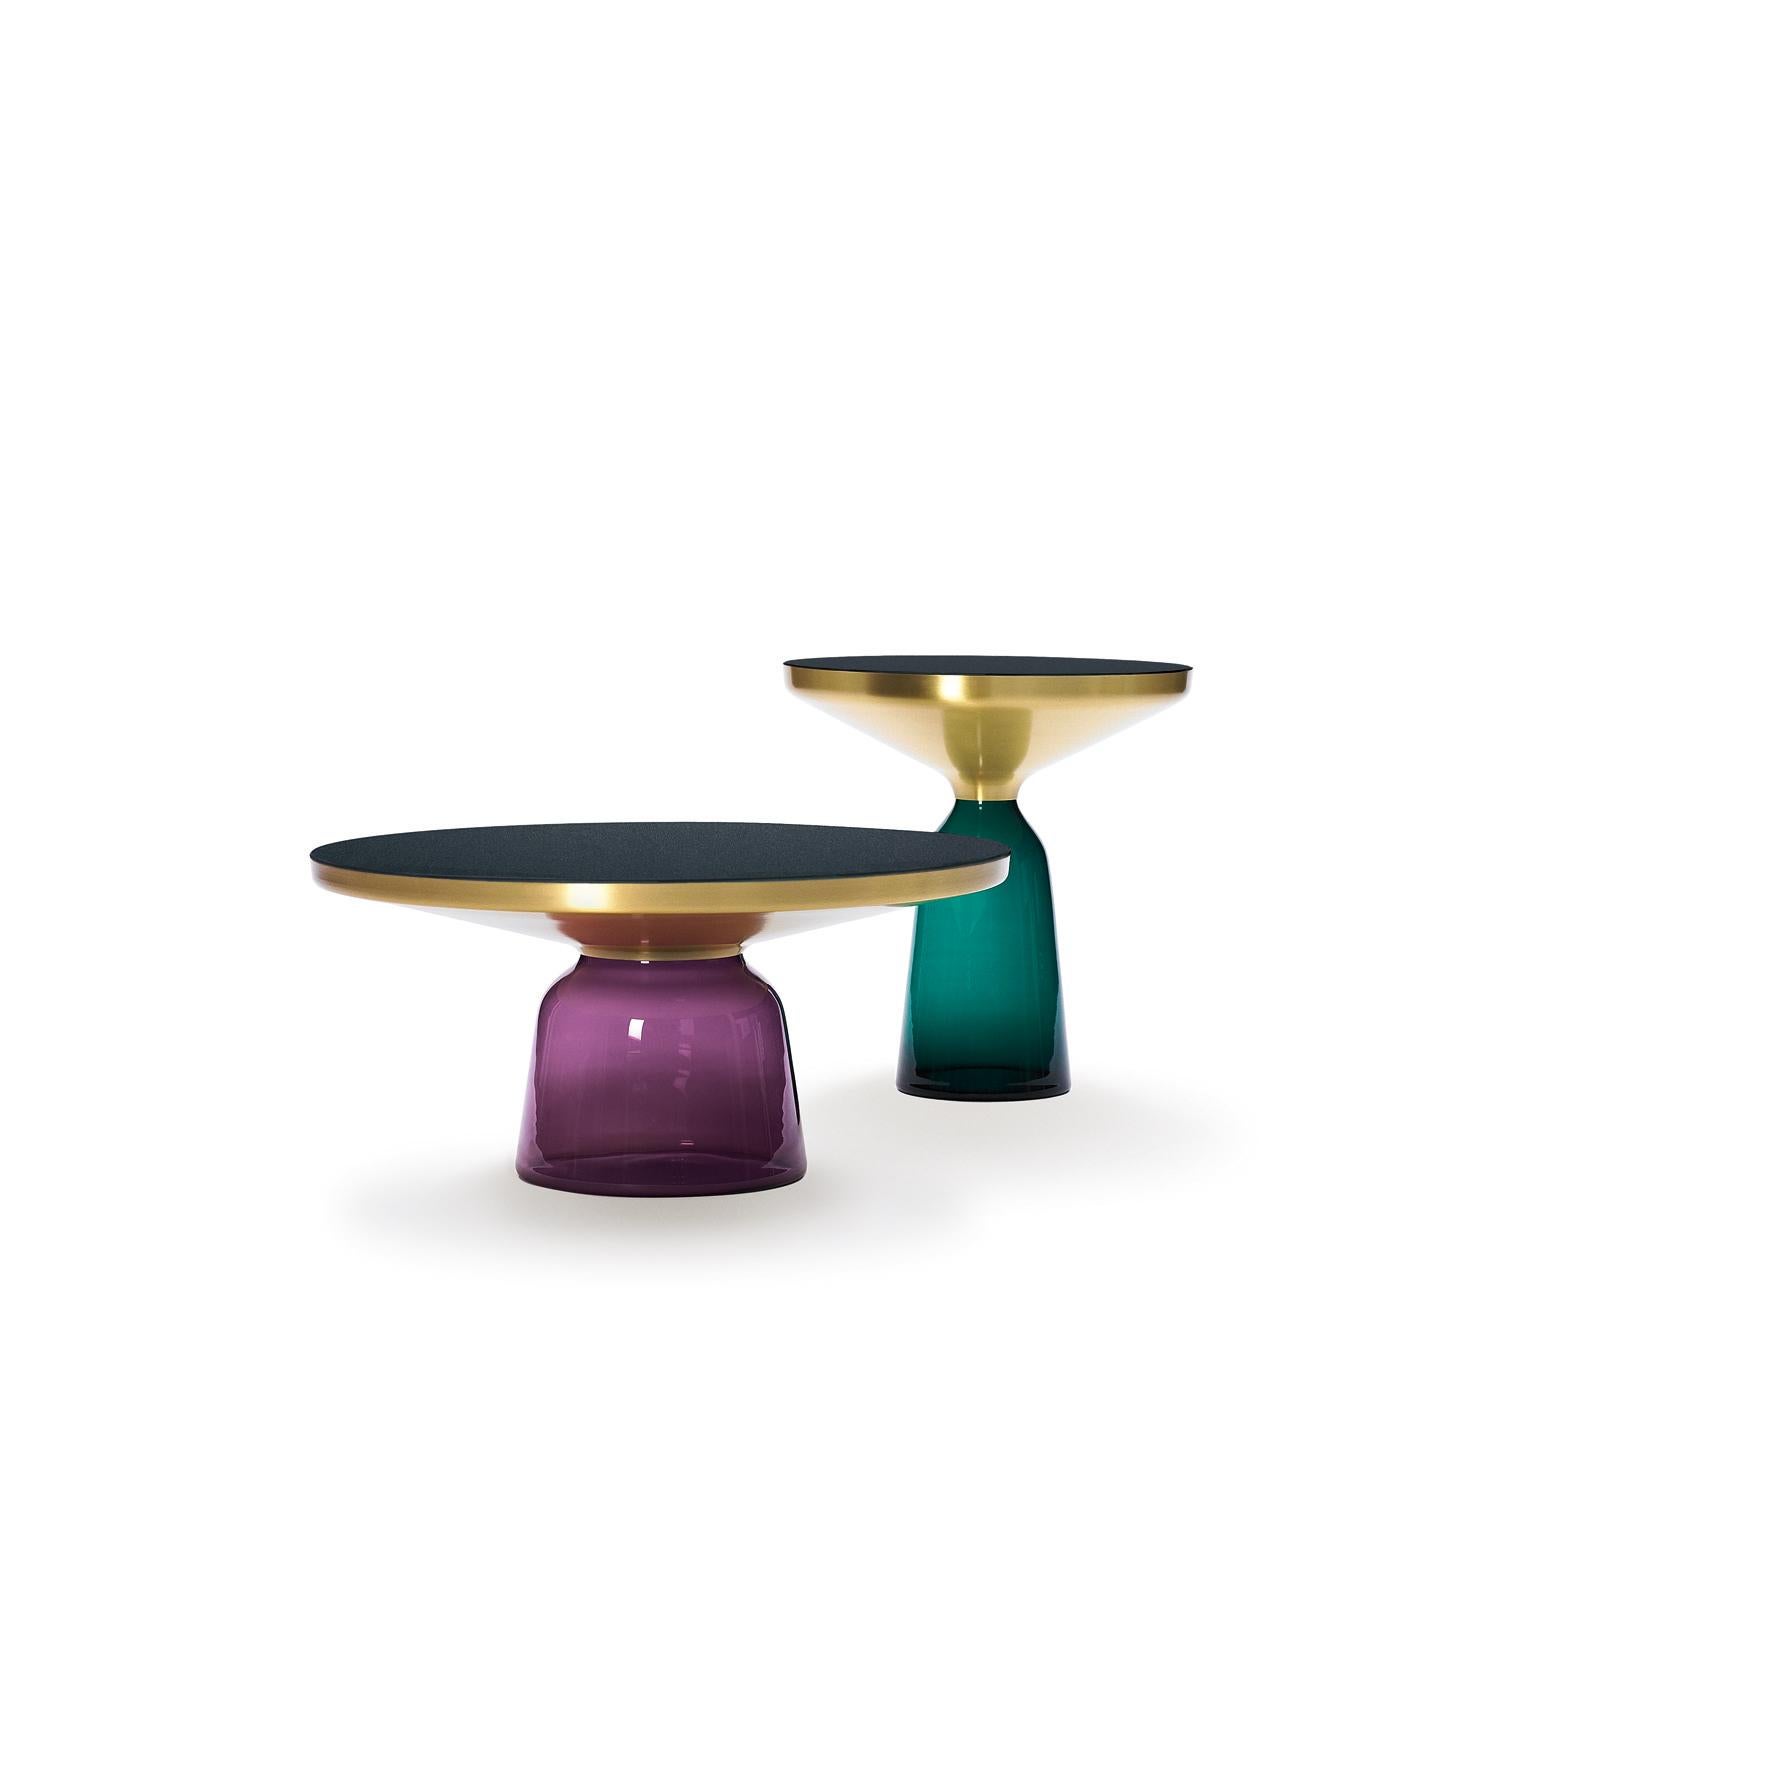 AVAILABLE WHILE STOCK LAST.
A modern classic as miniature: the bell table by Sebastian Herkner turns our perceptual habits on their head, using the lightweight, fragile material of glass as base for a metal top that seems to float above it. Hand